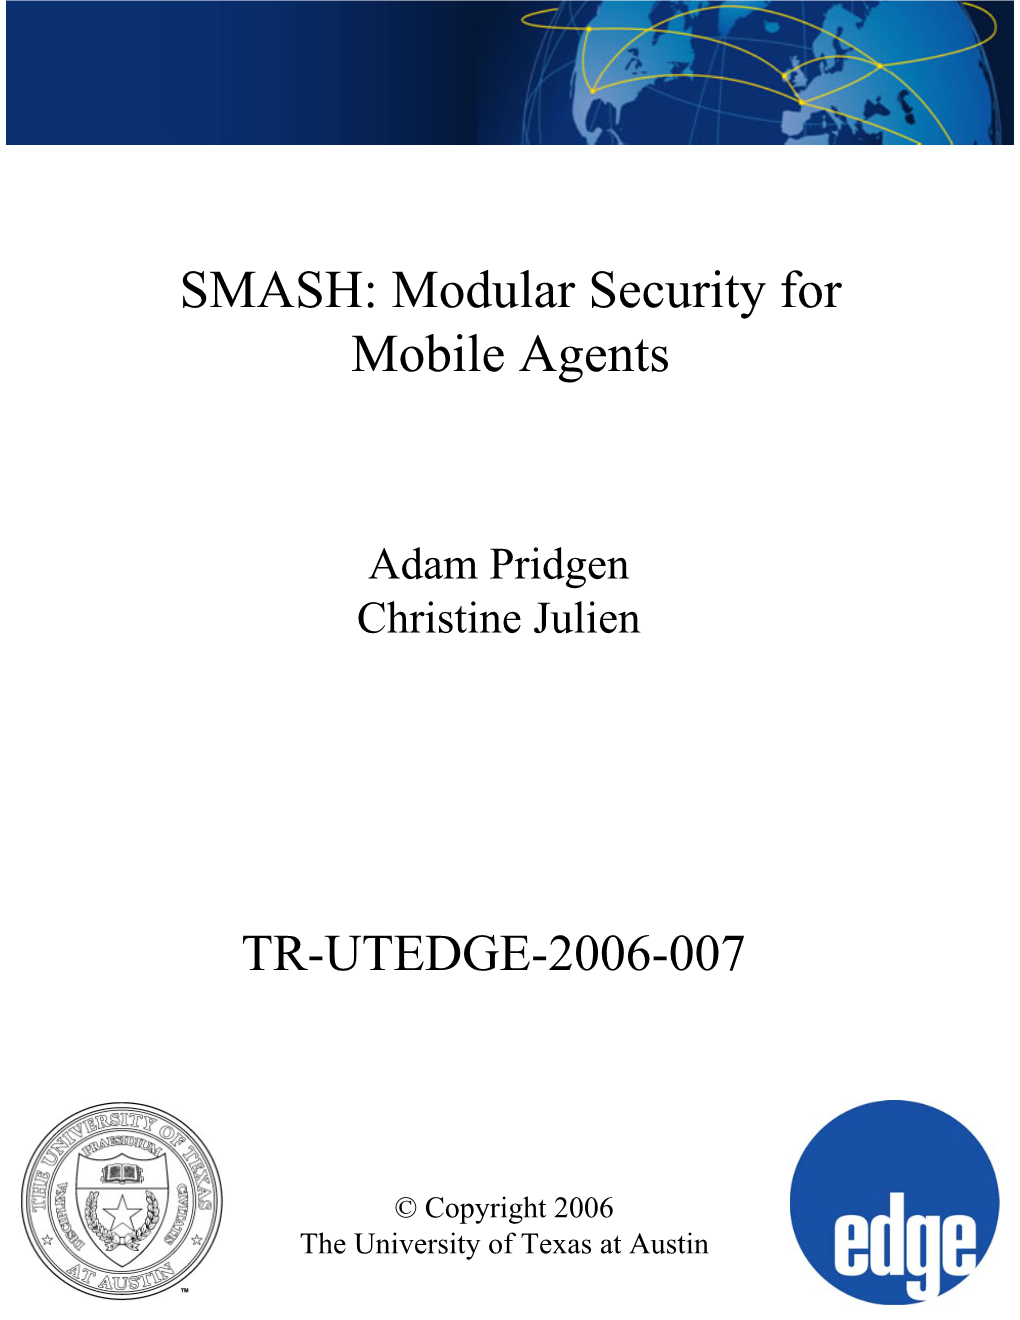 SMASH: Modular Security for Mobile Agents